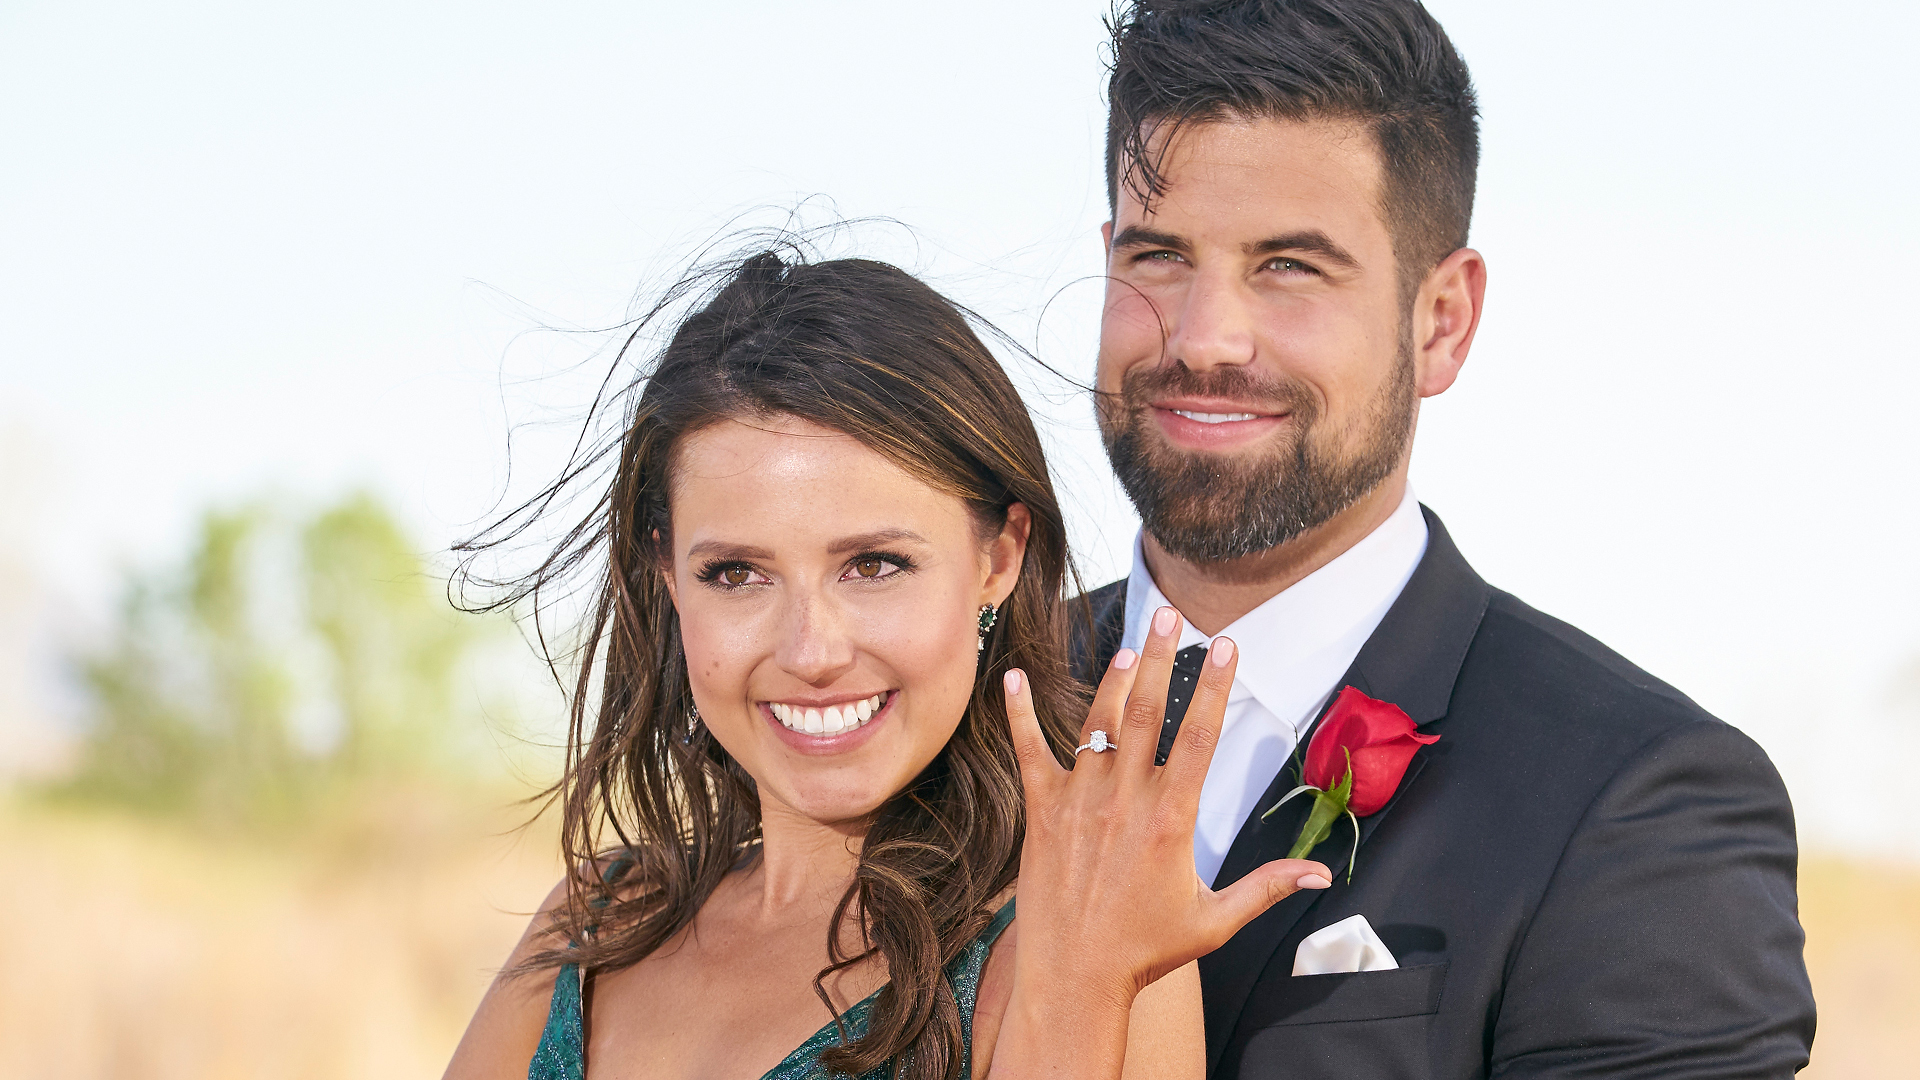 Katie Thurston and Blake Moynes show off the engagement ring in ‘The Bachelorette’ Season 17 finale